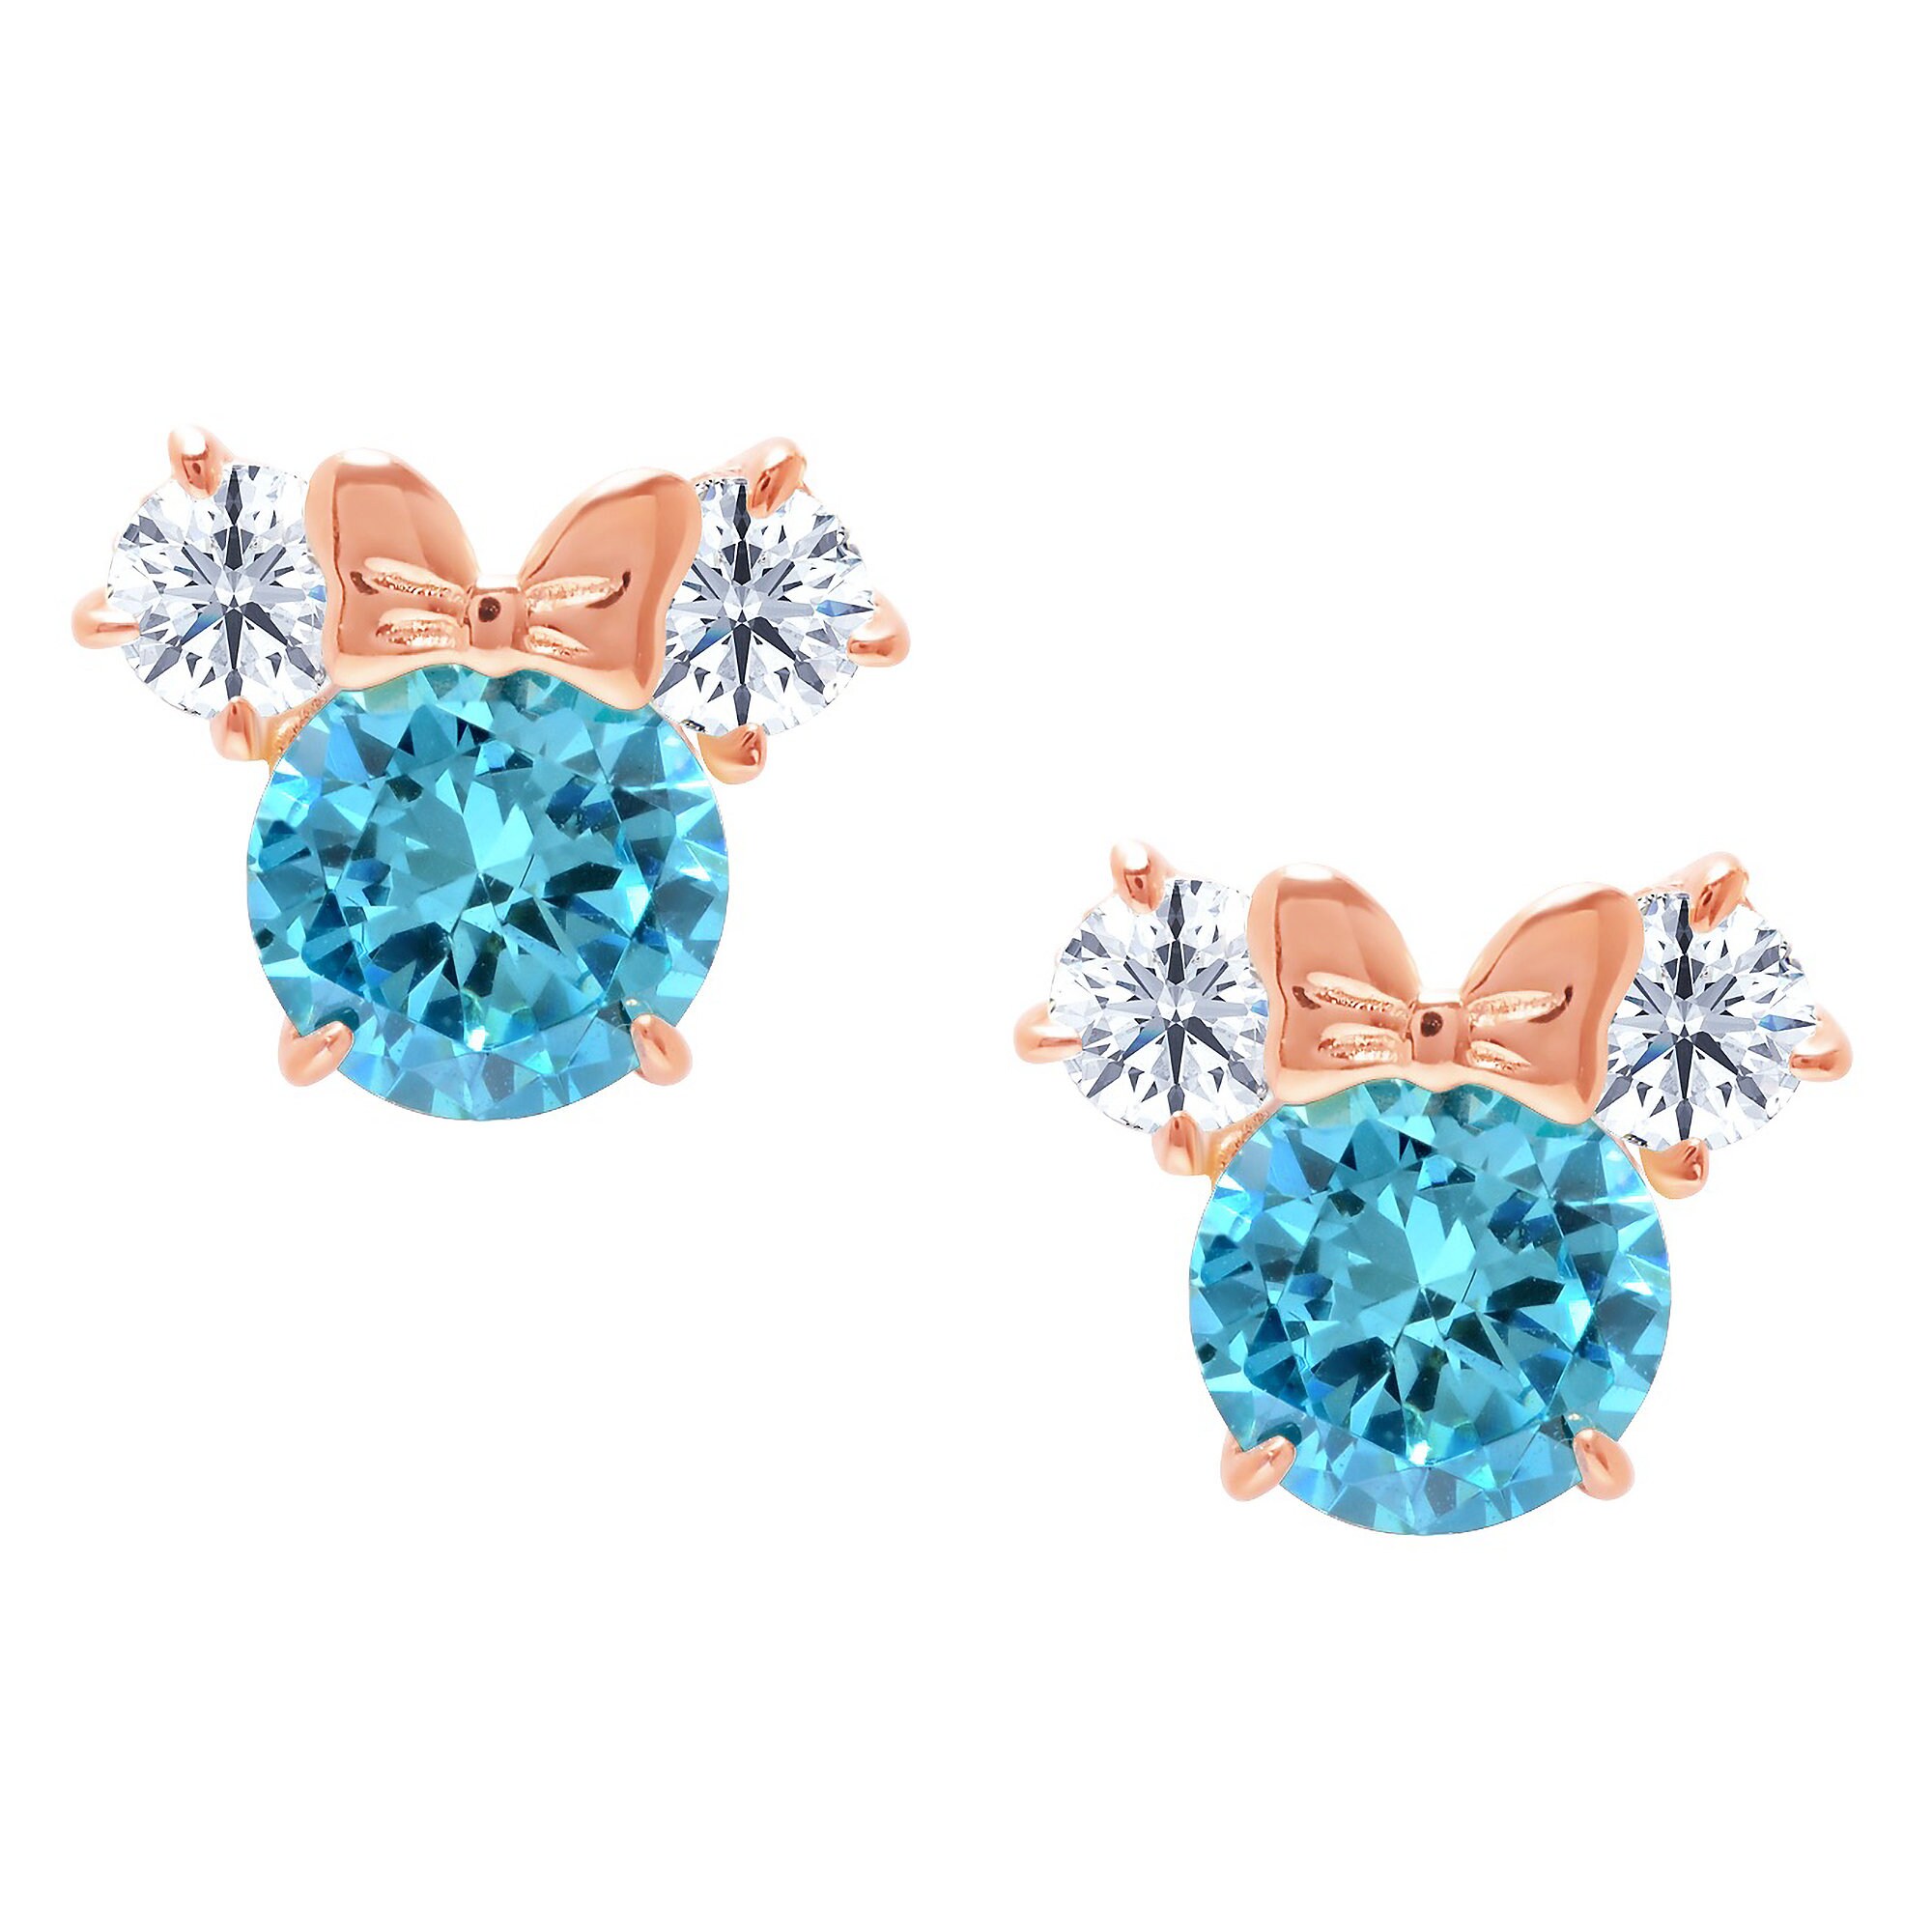 Minnie Mouse Birthstone Earrings for Kids by CRISLU - Rose Gold